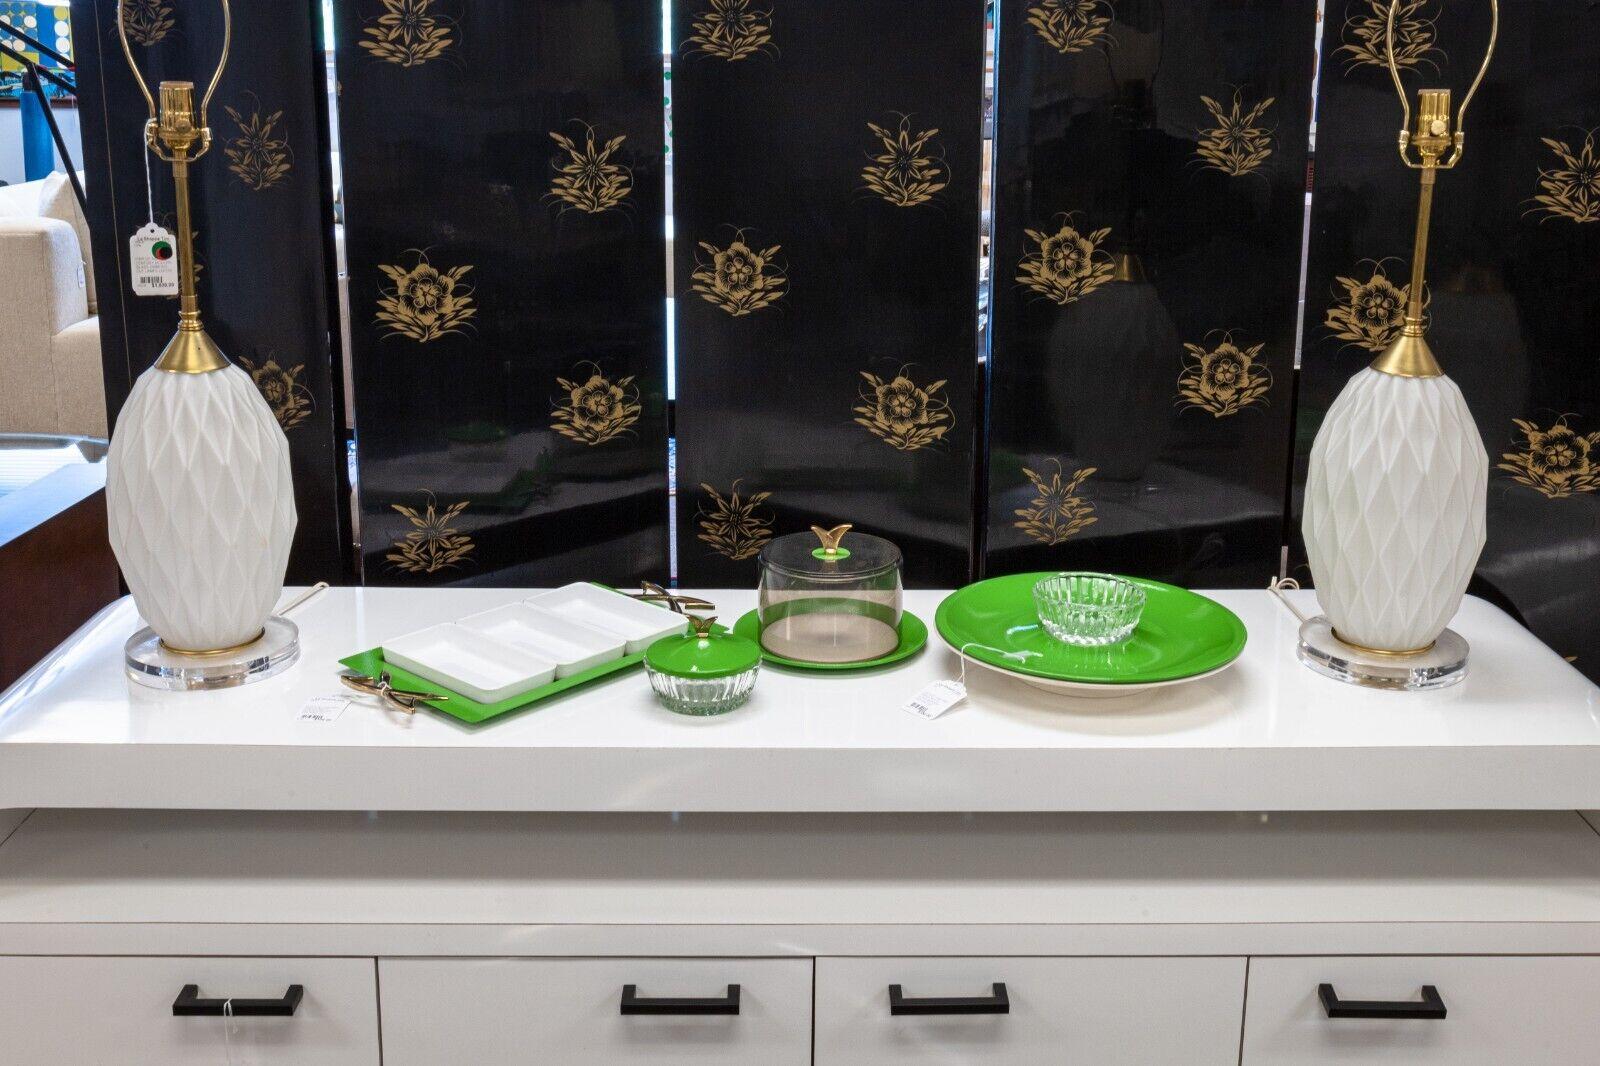 A vintage set of Kromex green and white, glass & brass serving set. This lovely little dining set includes a three piece serving platter tray, a smoked-covered serving plate, a small covered glass serving bowl, and a rotating serving platter. This